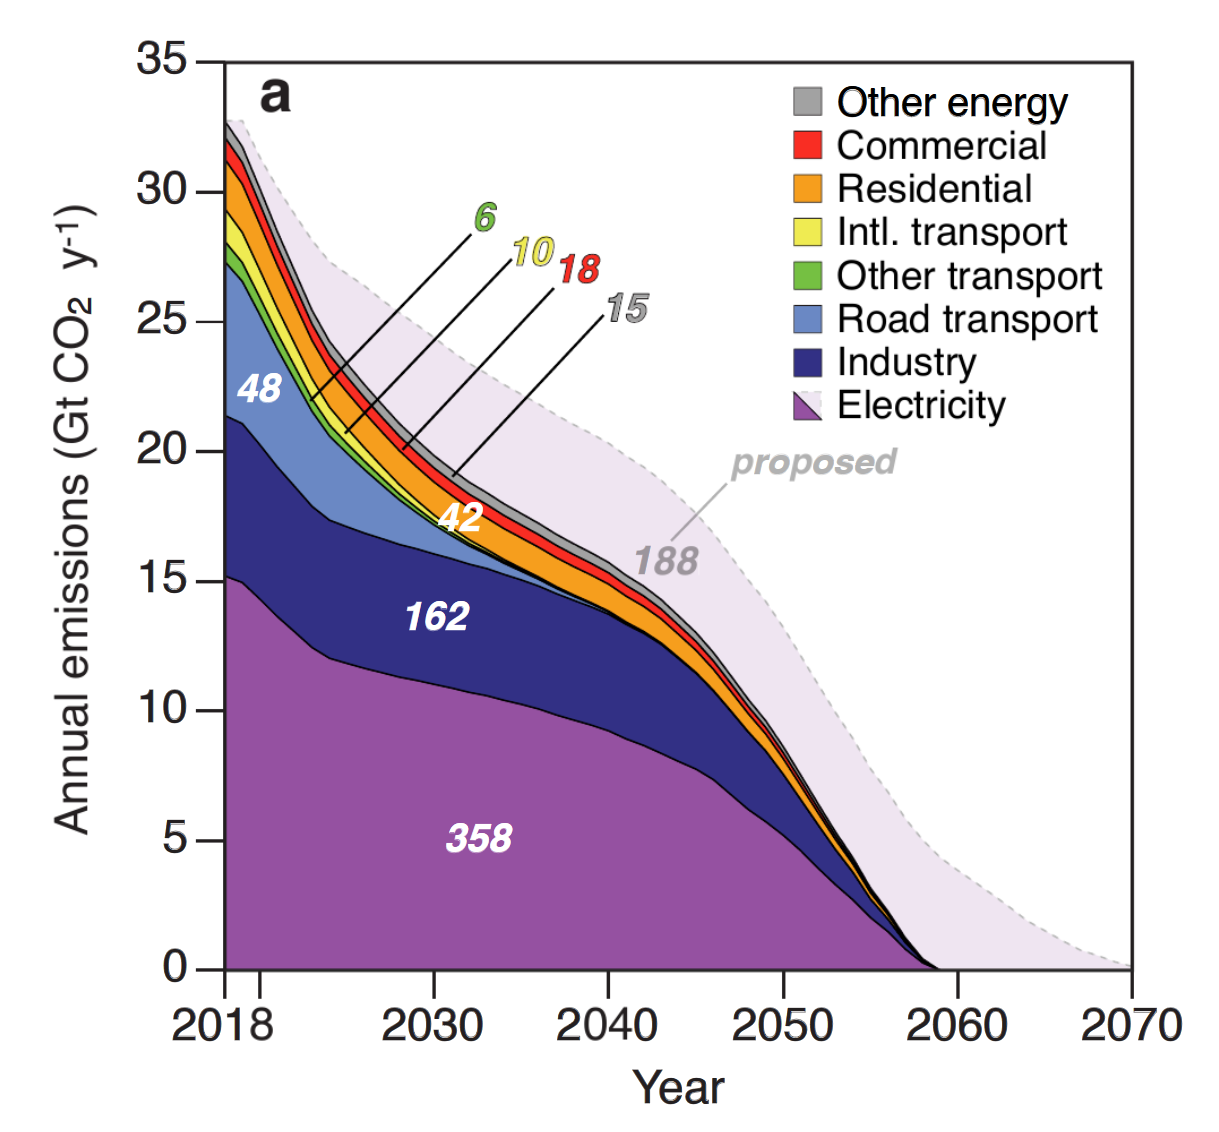 Committed CO2 emissions from existing and proposed energy infrastructure. Estimates of future CO2 emissions by industry sector and country/region Emissions from existing infrastructure are shown by darker shading, and emissions from proposed power plants (i.e. electricity) are more lightly shaded. Graphic: Tong, et al., 2019 / Nature